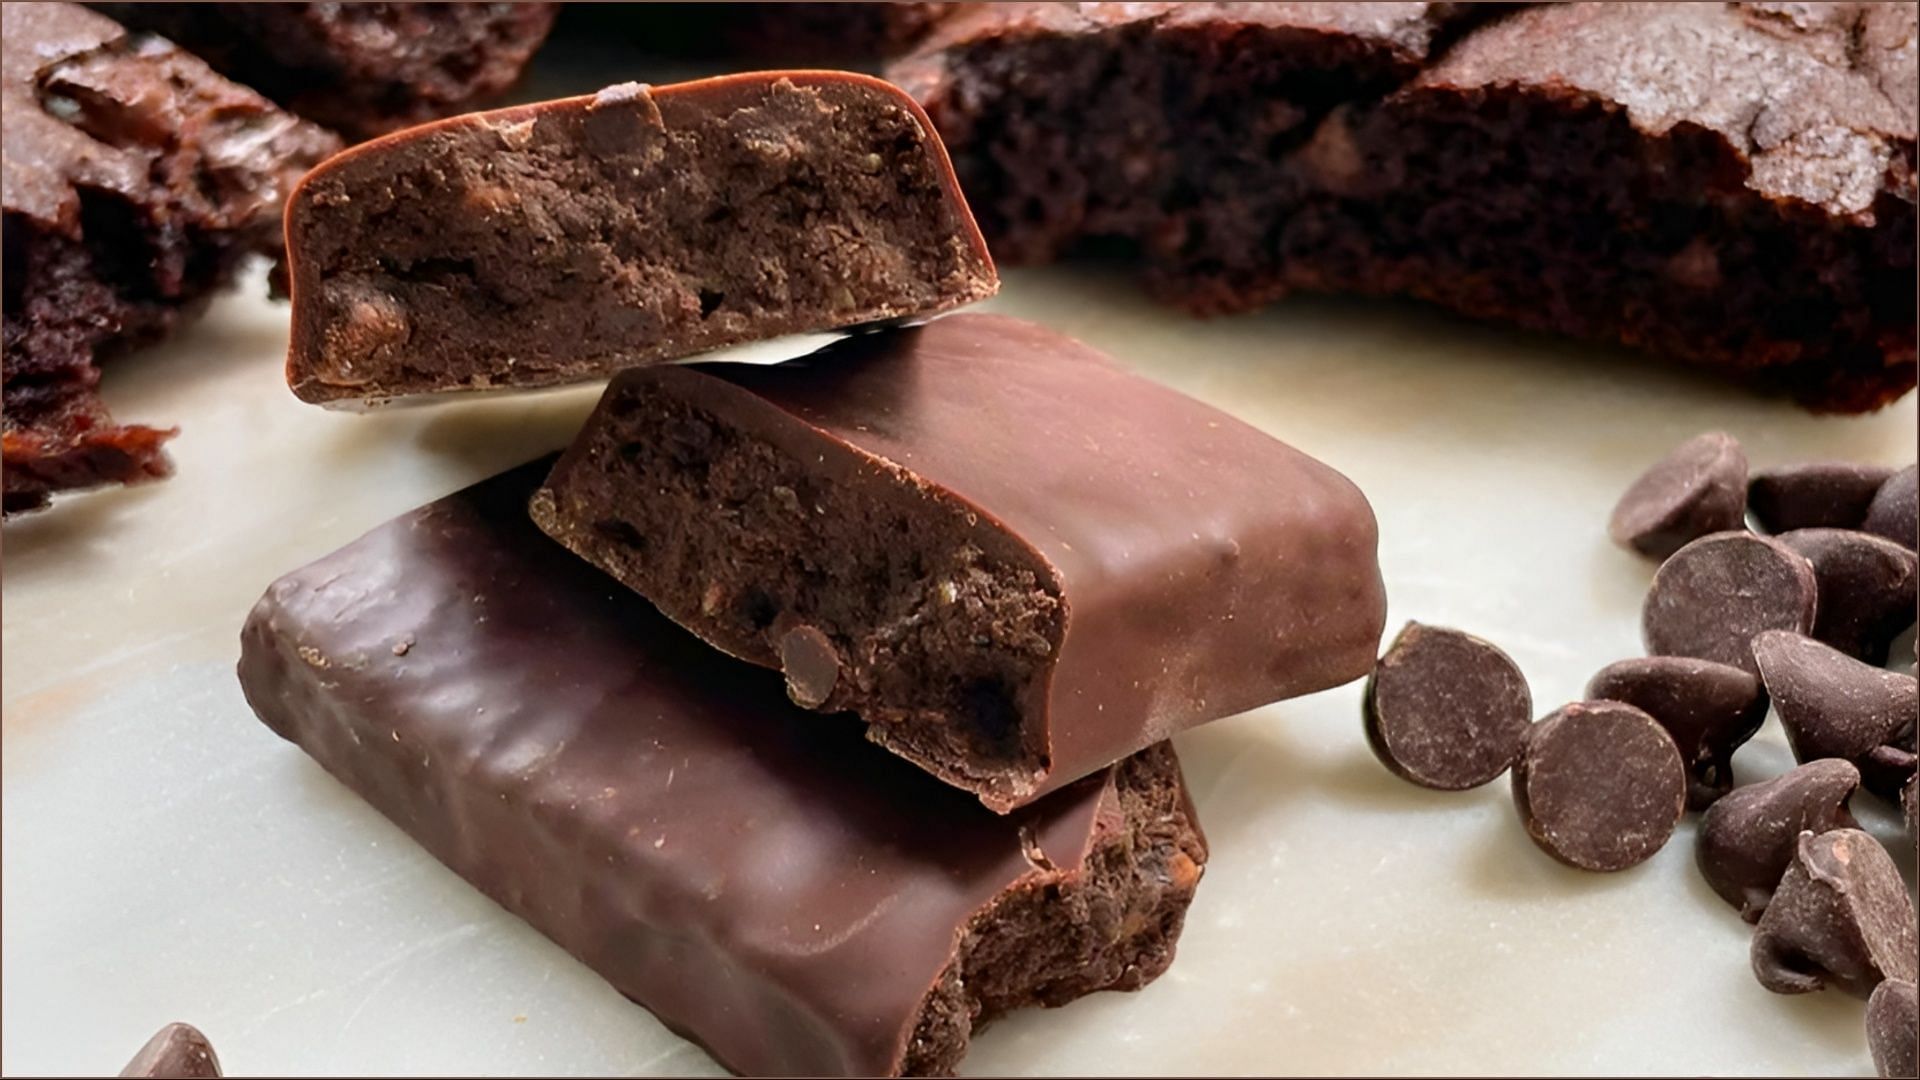 The new Dark Chocolate Brownie Crunch snack bars hit stores nationwide starting March 2 (Image via T. Bar)